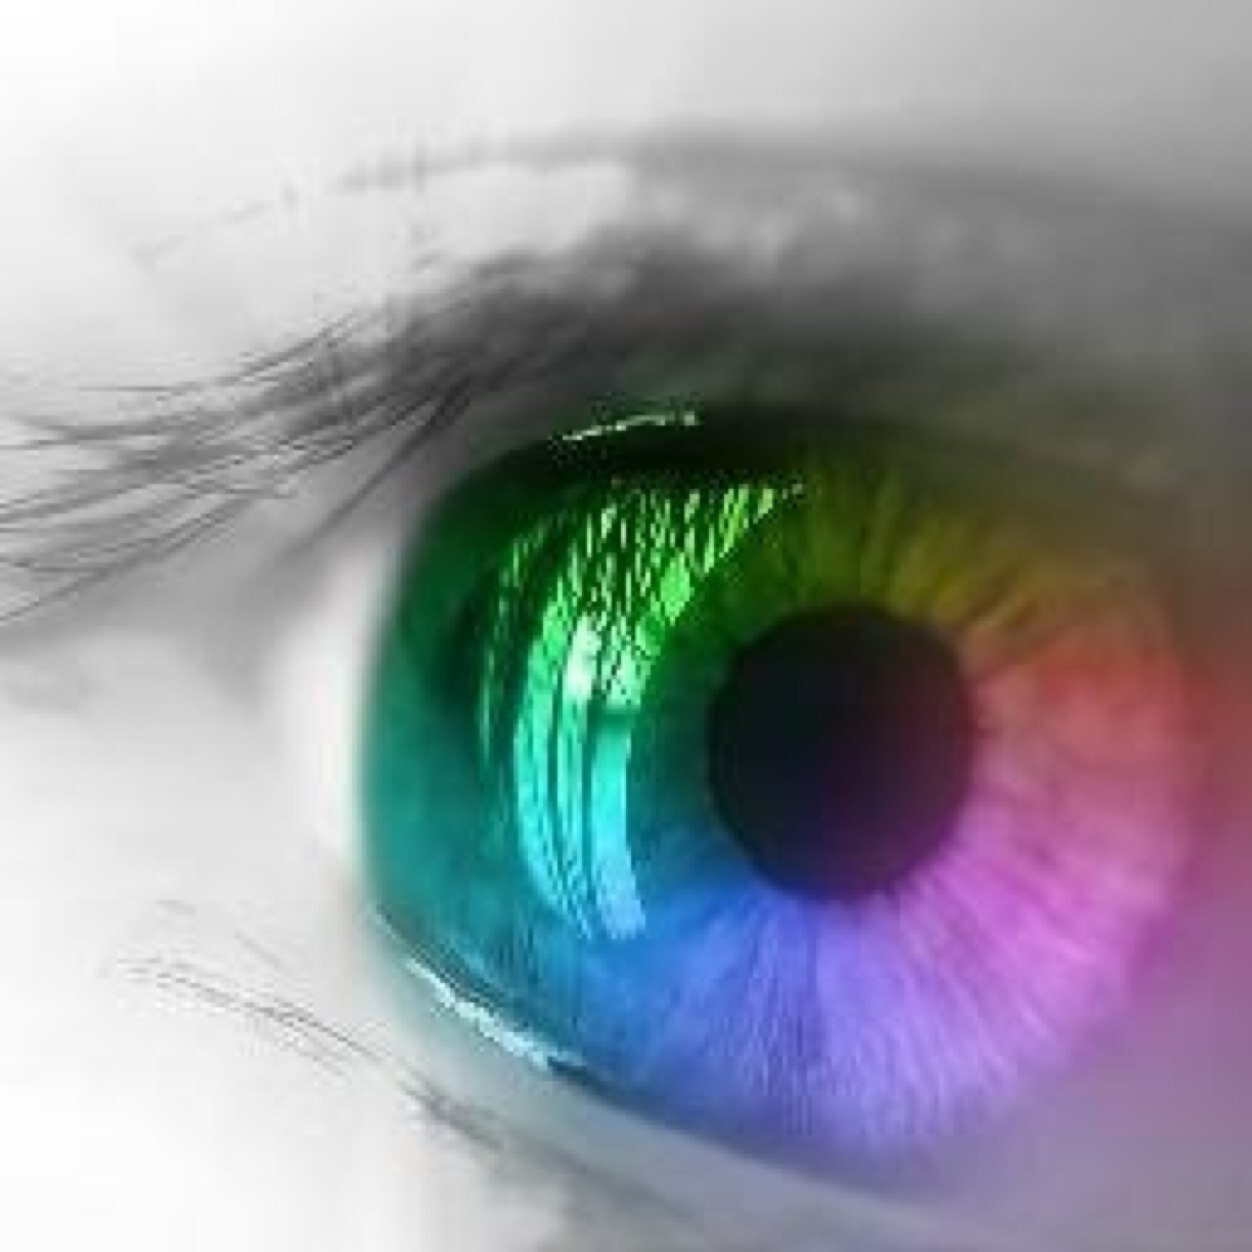 Your eyes say more than you think! We post the meanings of eye colors green, brown and blue. At 100,000 followers we also post other colors!